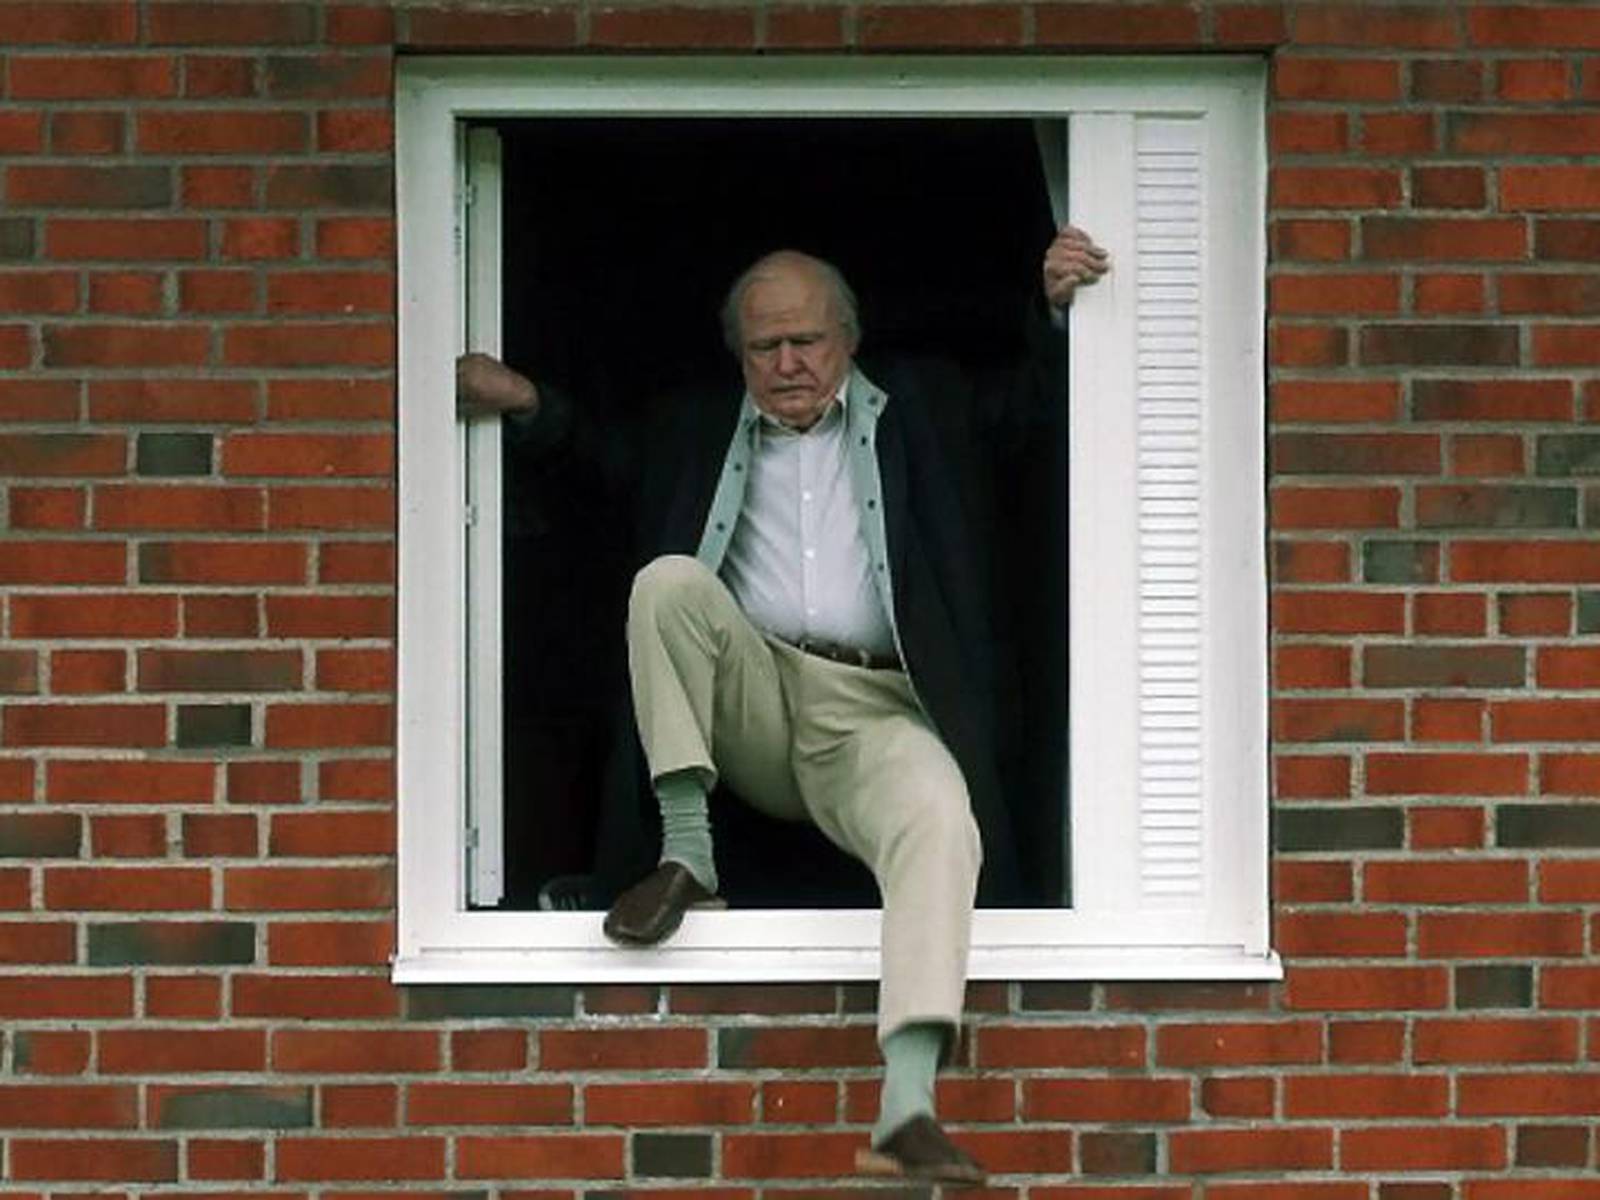 The 100 Year-Old Man Who Climbed Out the Window and Disappeared